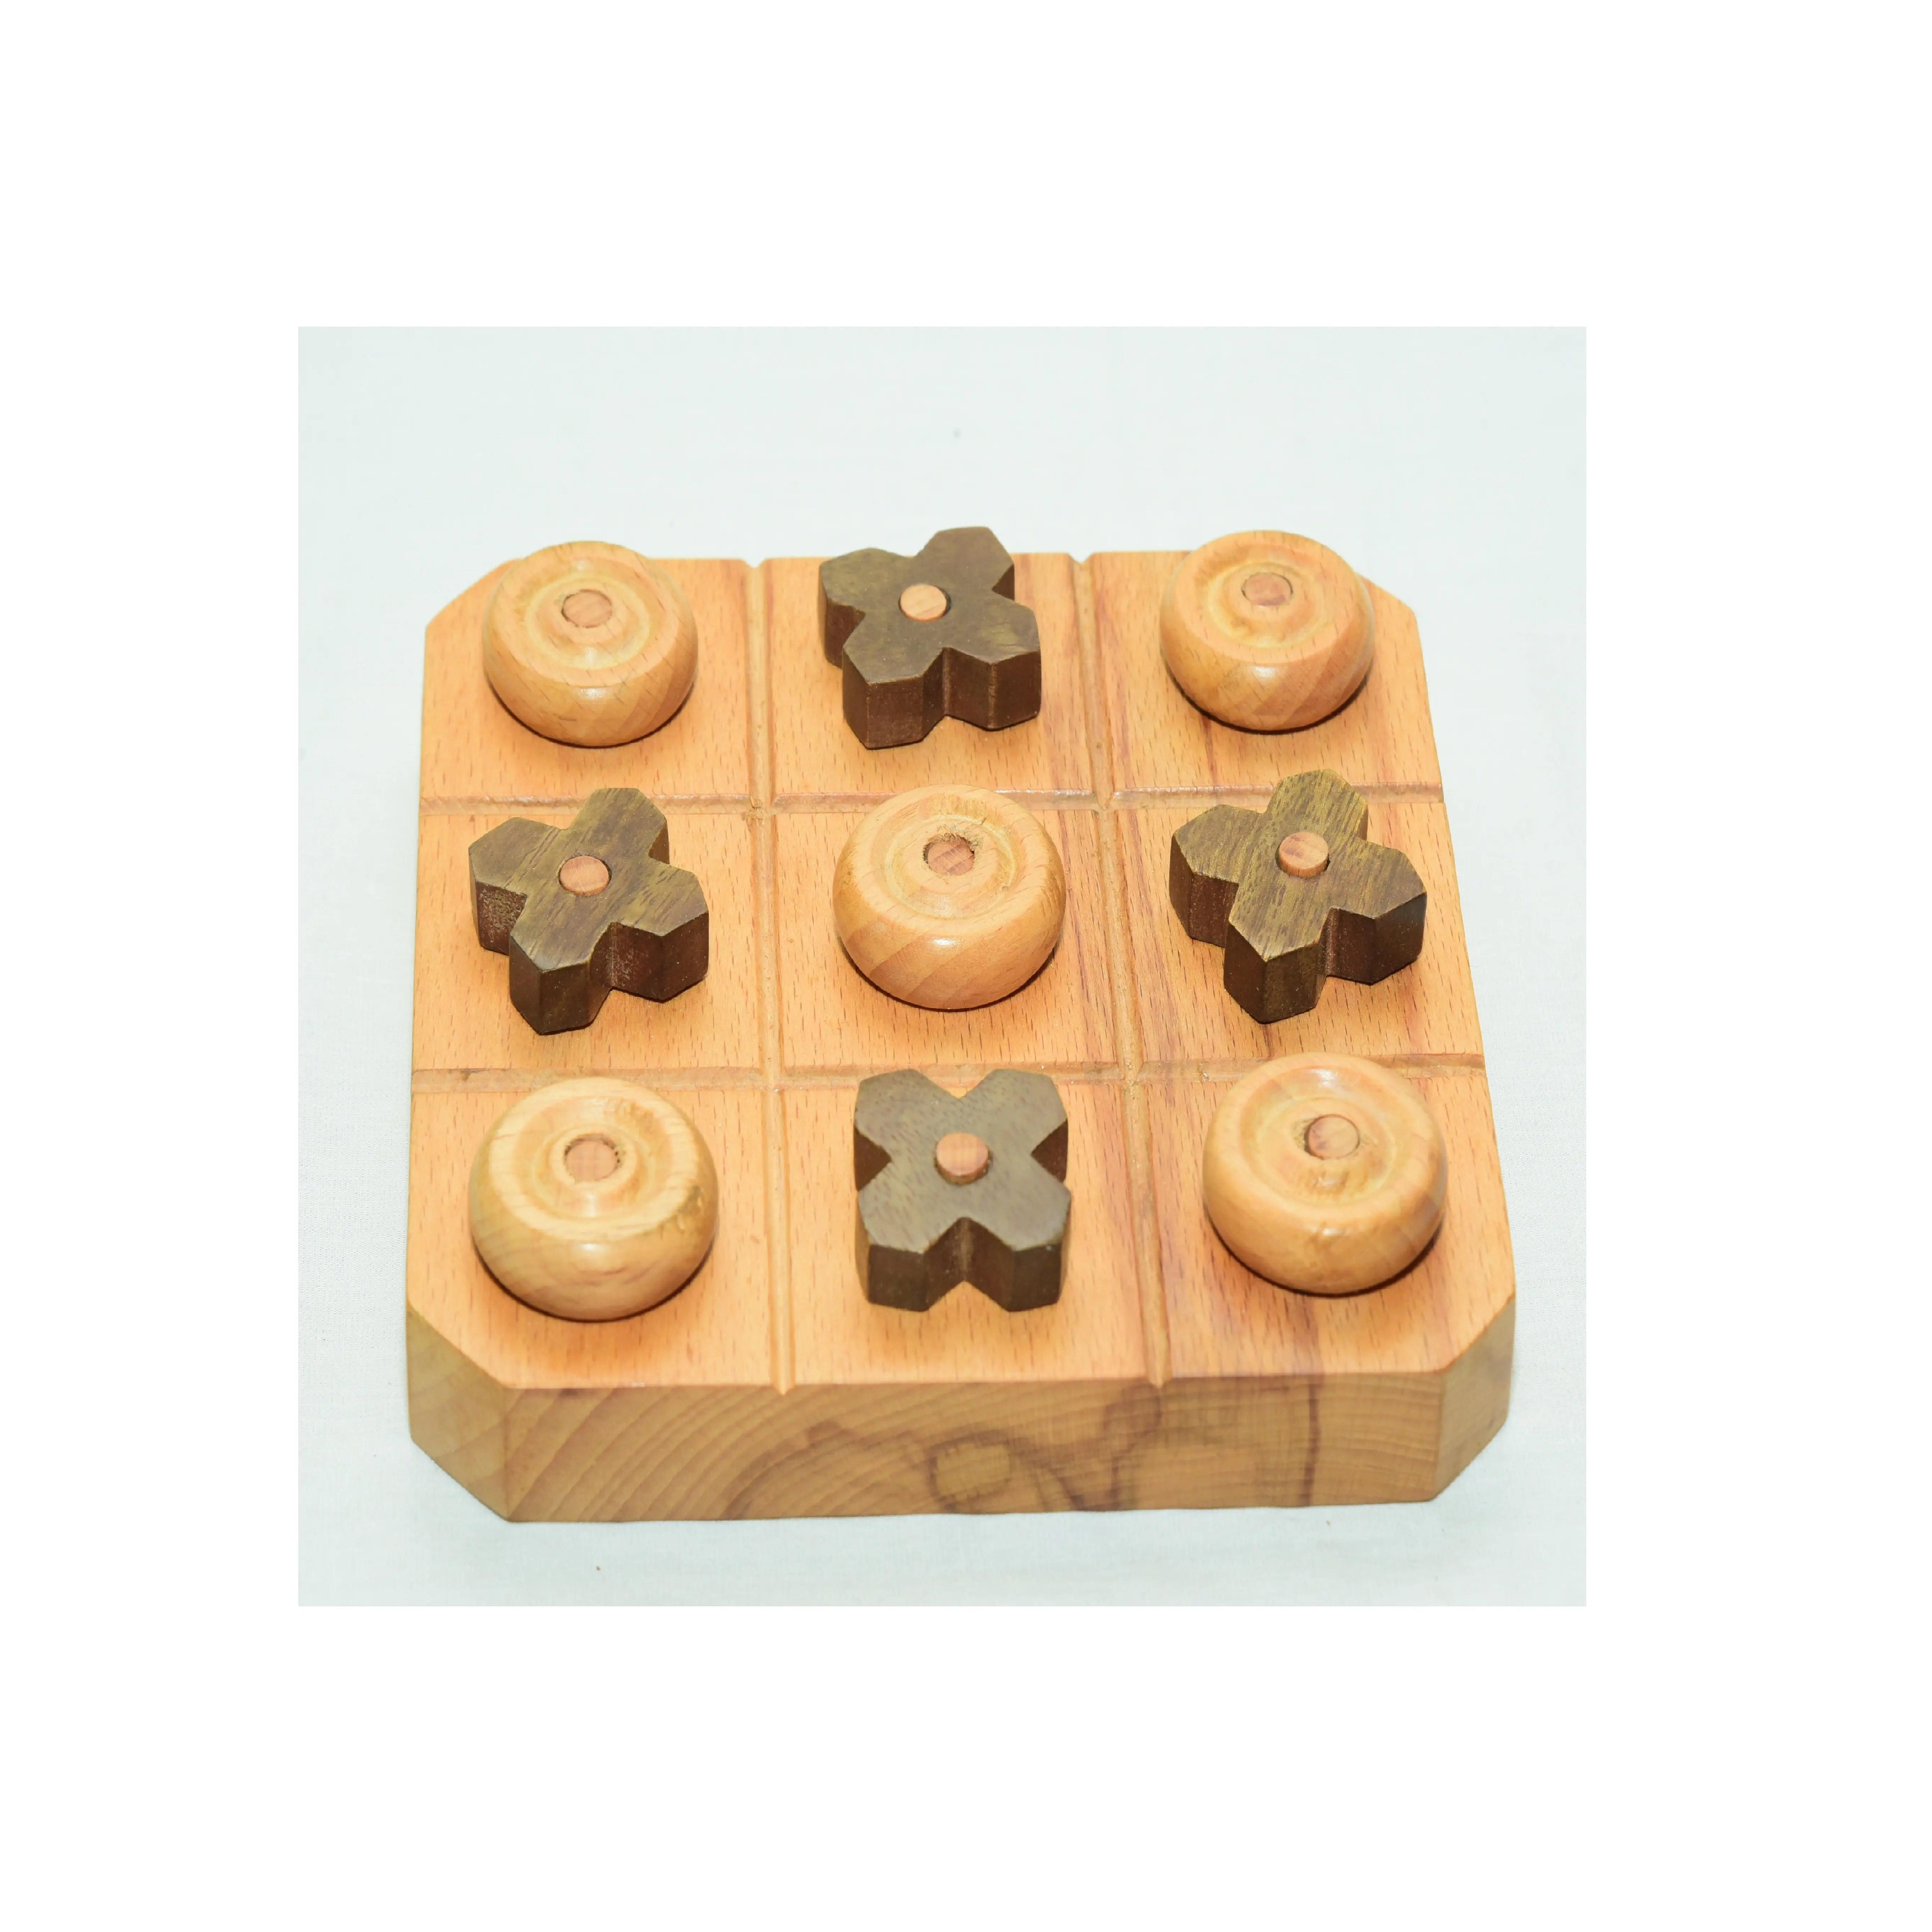 wooden tic tak toe perfect gifting for birthday Tic Tac Toe Game for Kids and Family Board Games table top Indoor Entertainment